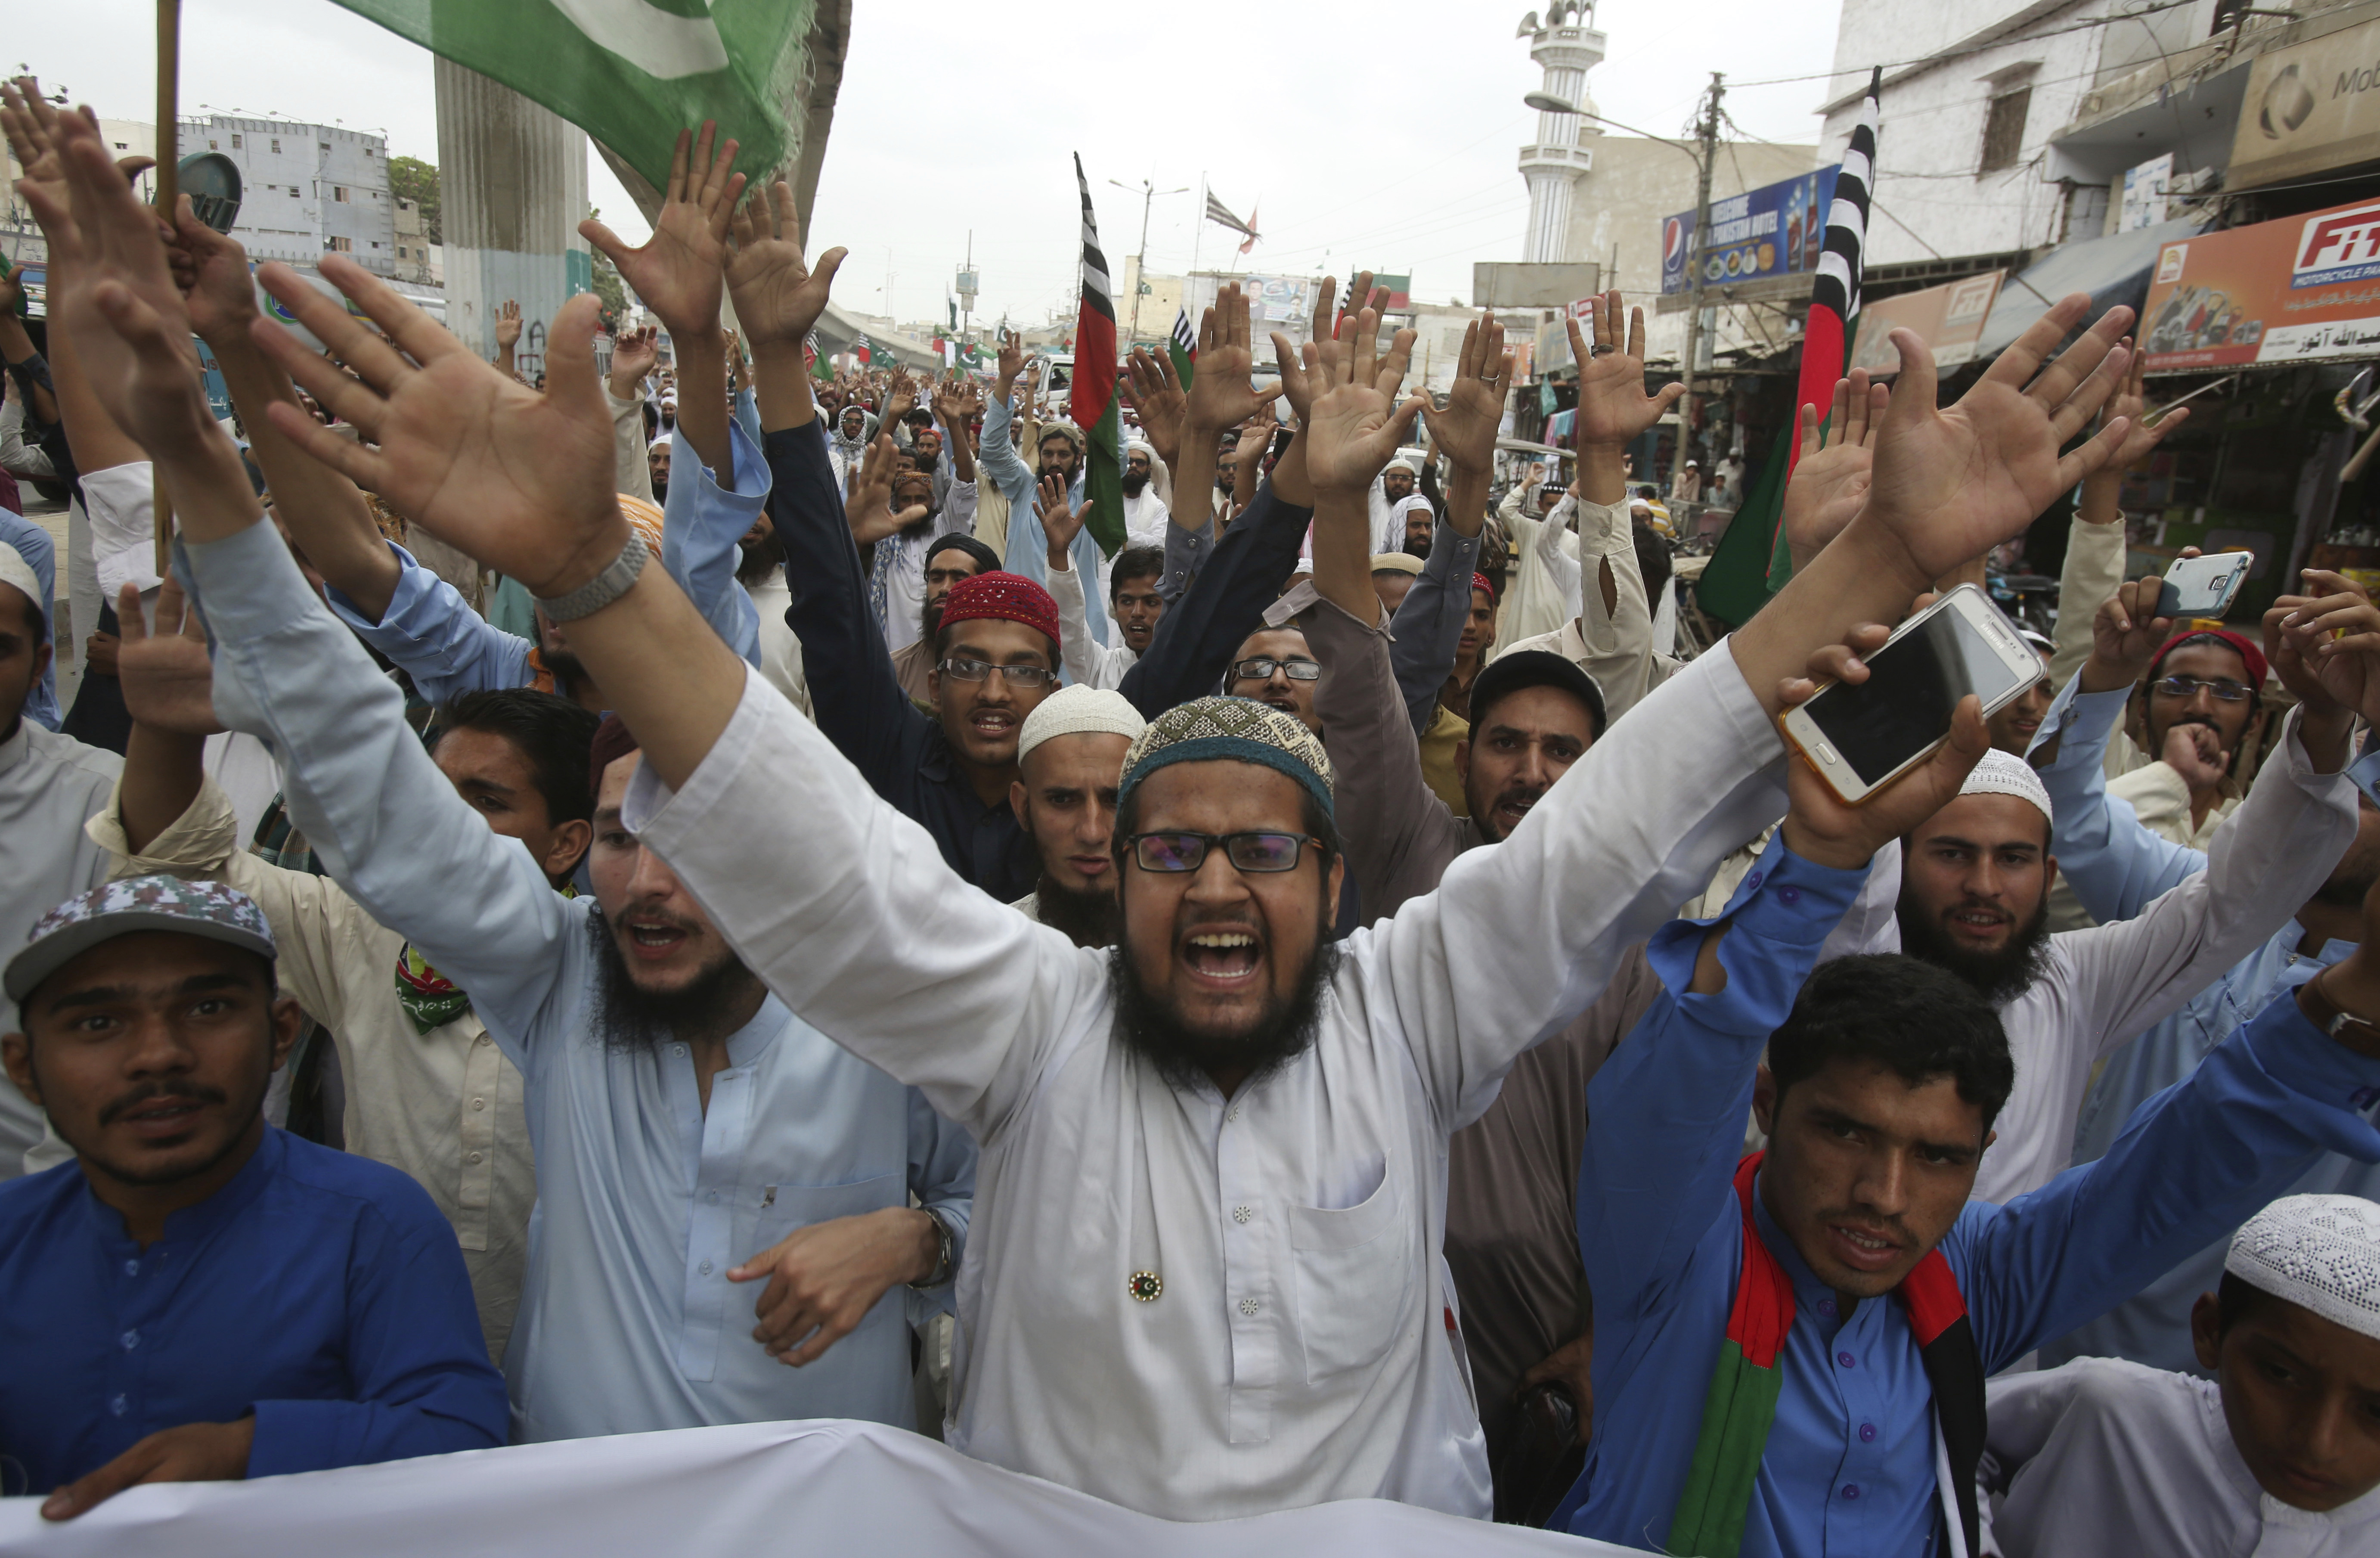 Pakistani protesters demonstrate to condemn the planned anti-Islam cartoon contest, in Karachi, Pakistan, Thursday, Aug. 30, 2018. Thousands of hard-line Islamists angered over a far-right Dutch lawmaker's plans to hold a Prophet Muhammad cartoon contest marched toward Pakistan's capital. (AP Photo/Fareed Khan)